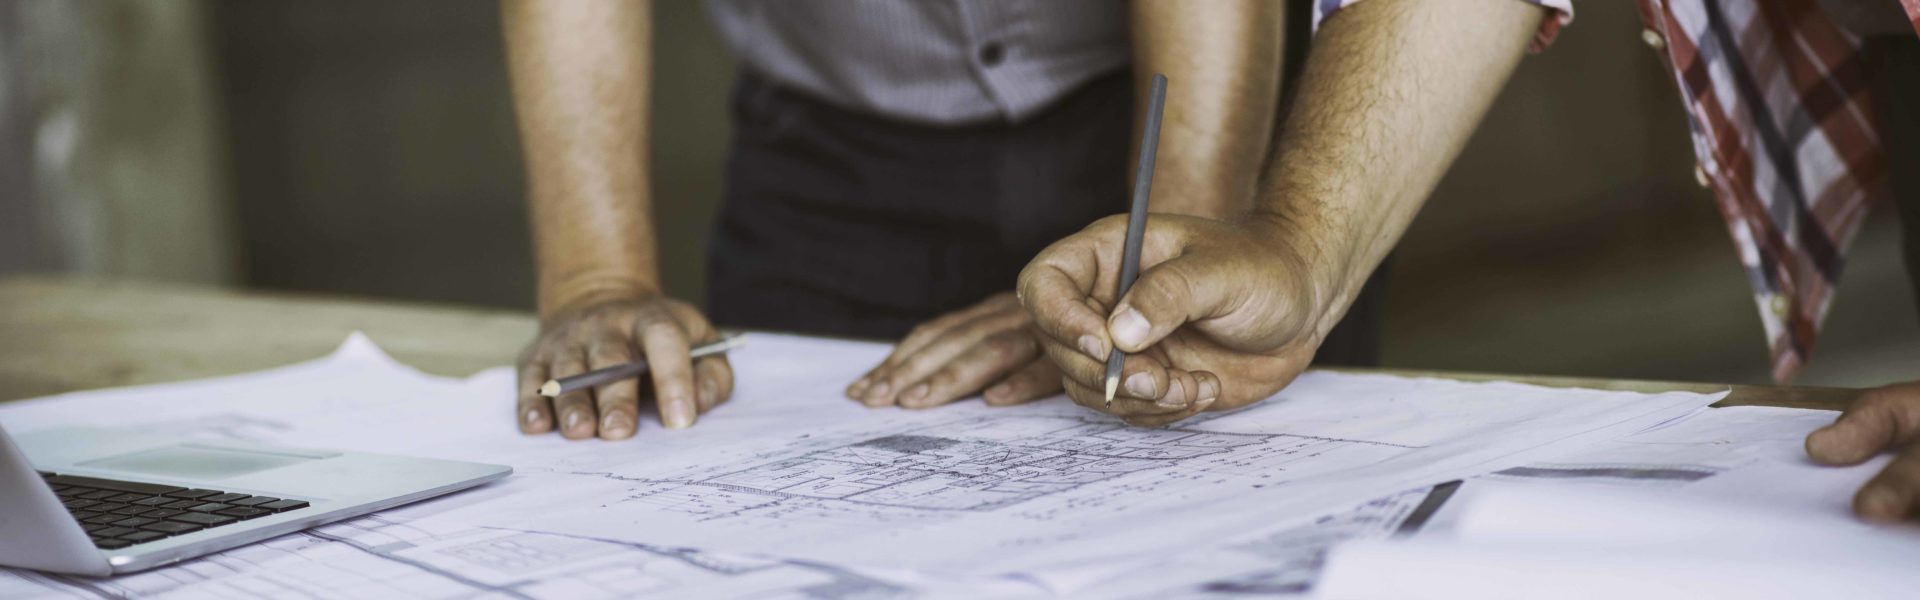 Close up of two architect's hands holding pencils over some building blueprints.